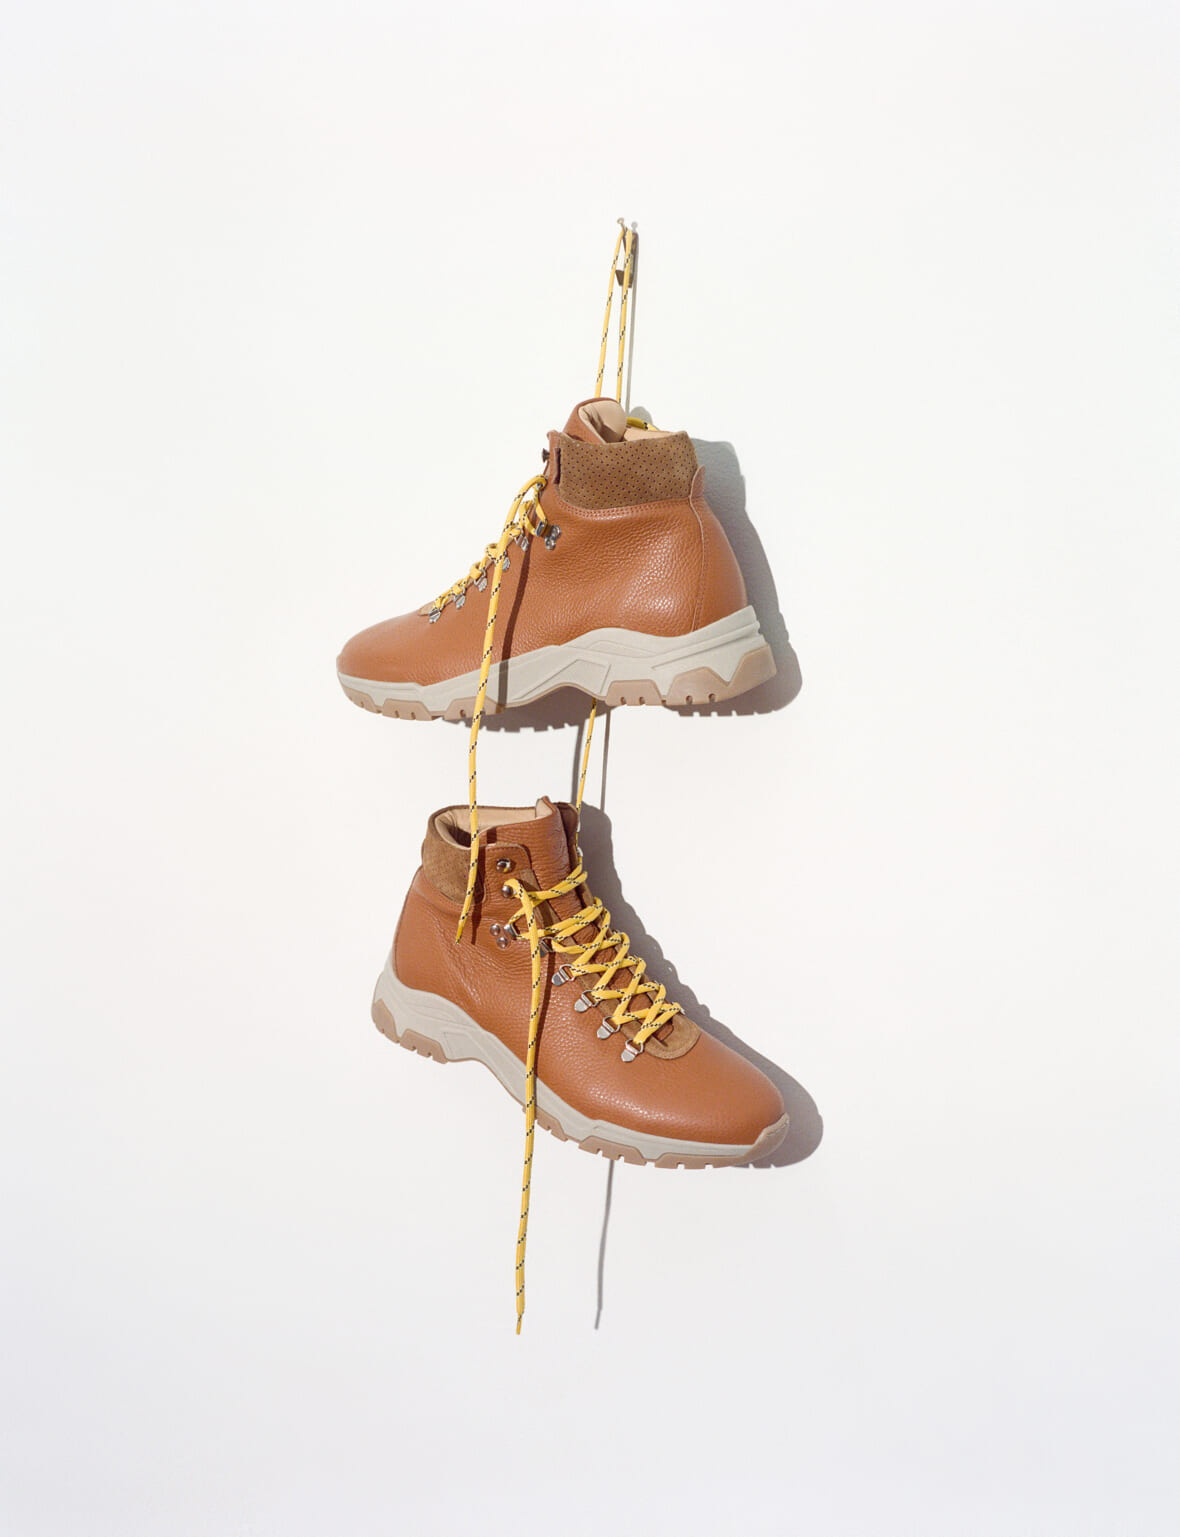 Greats Editorial 12 13 000397100004 1 GREATS Park Hikers Are All-Weather Boots With 'Sneaker-Inspired' Soles